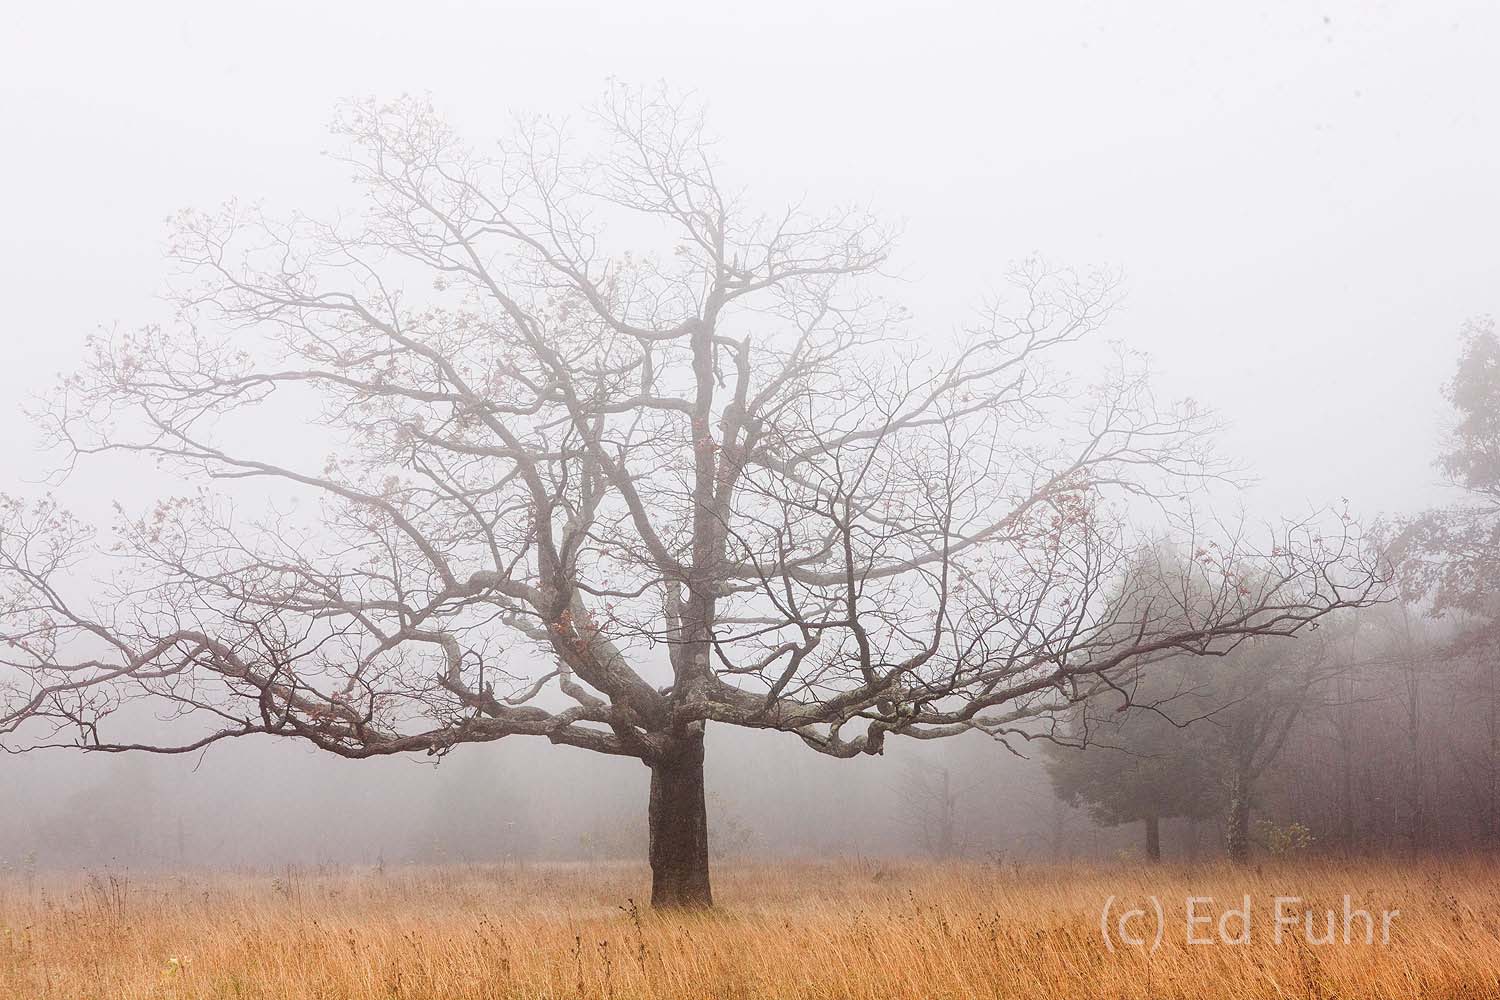 The grasses below the oak on Tanner Ridge provide a hint of color on this foggy late autumn day.